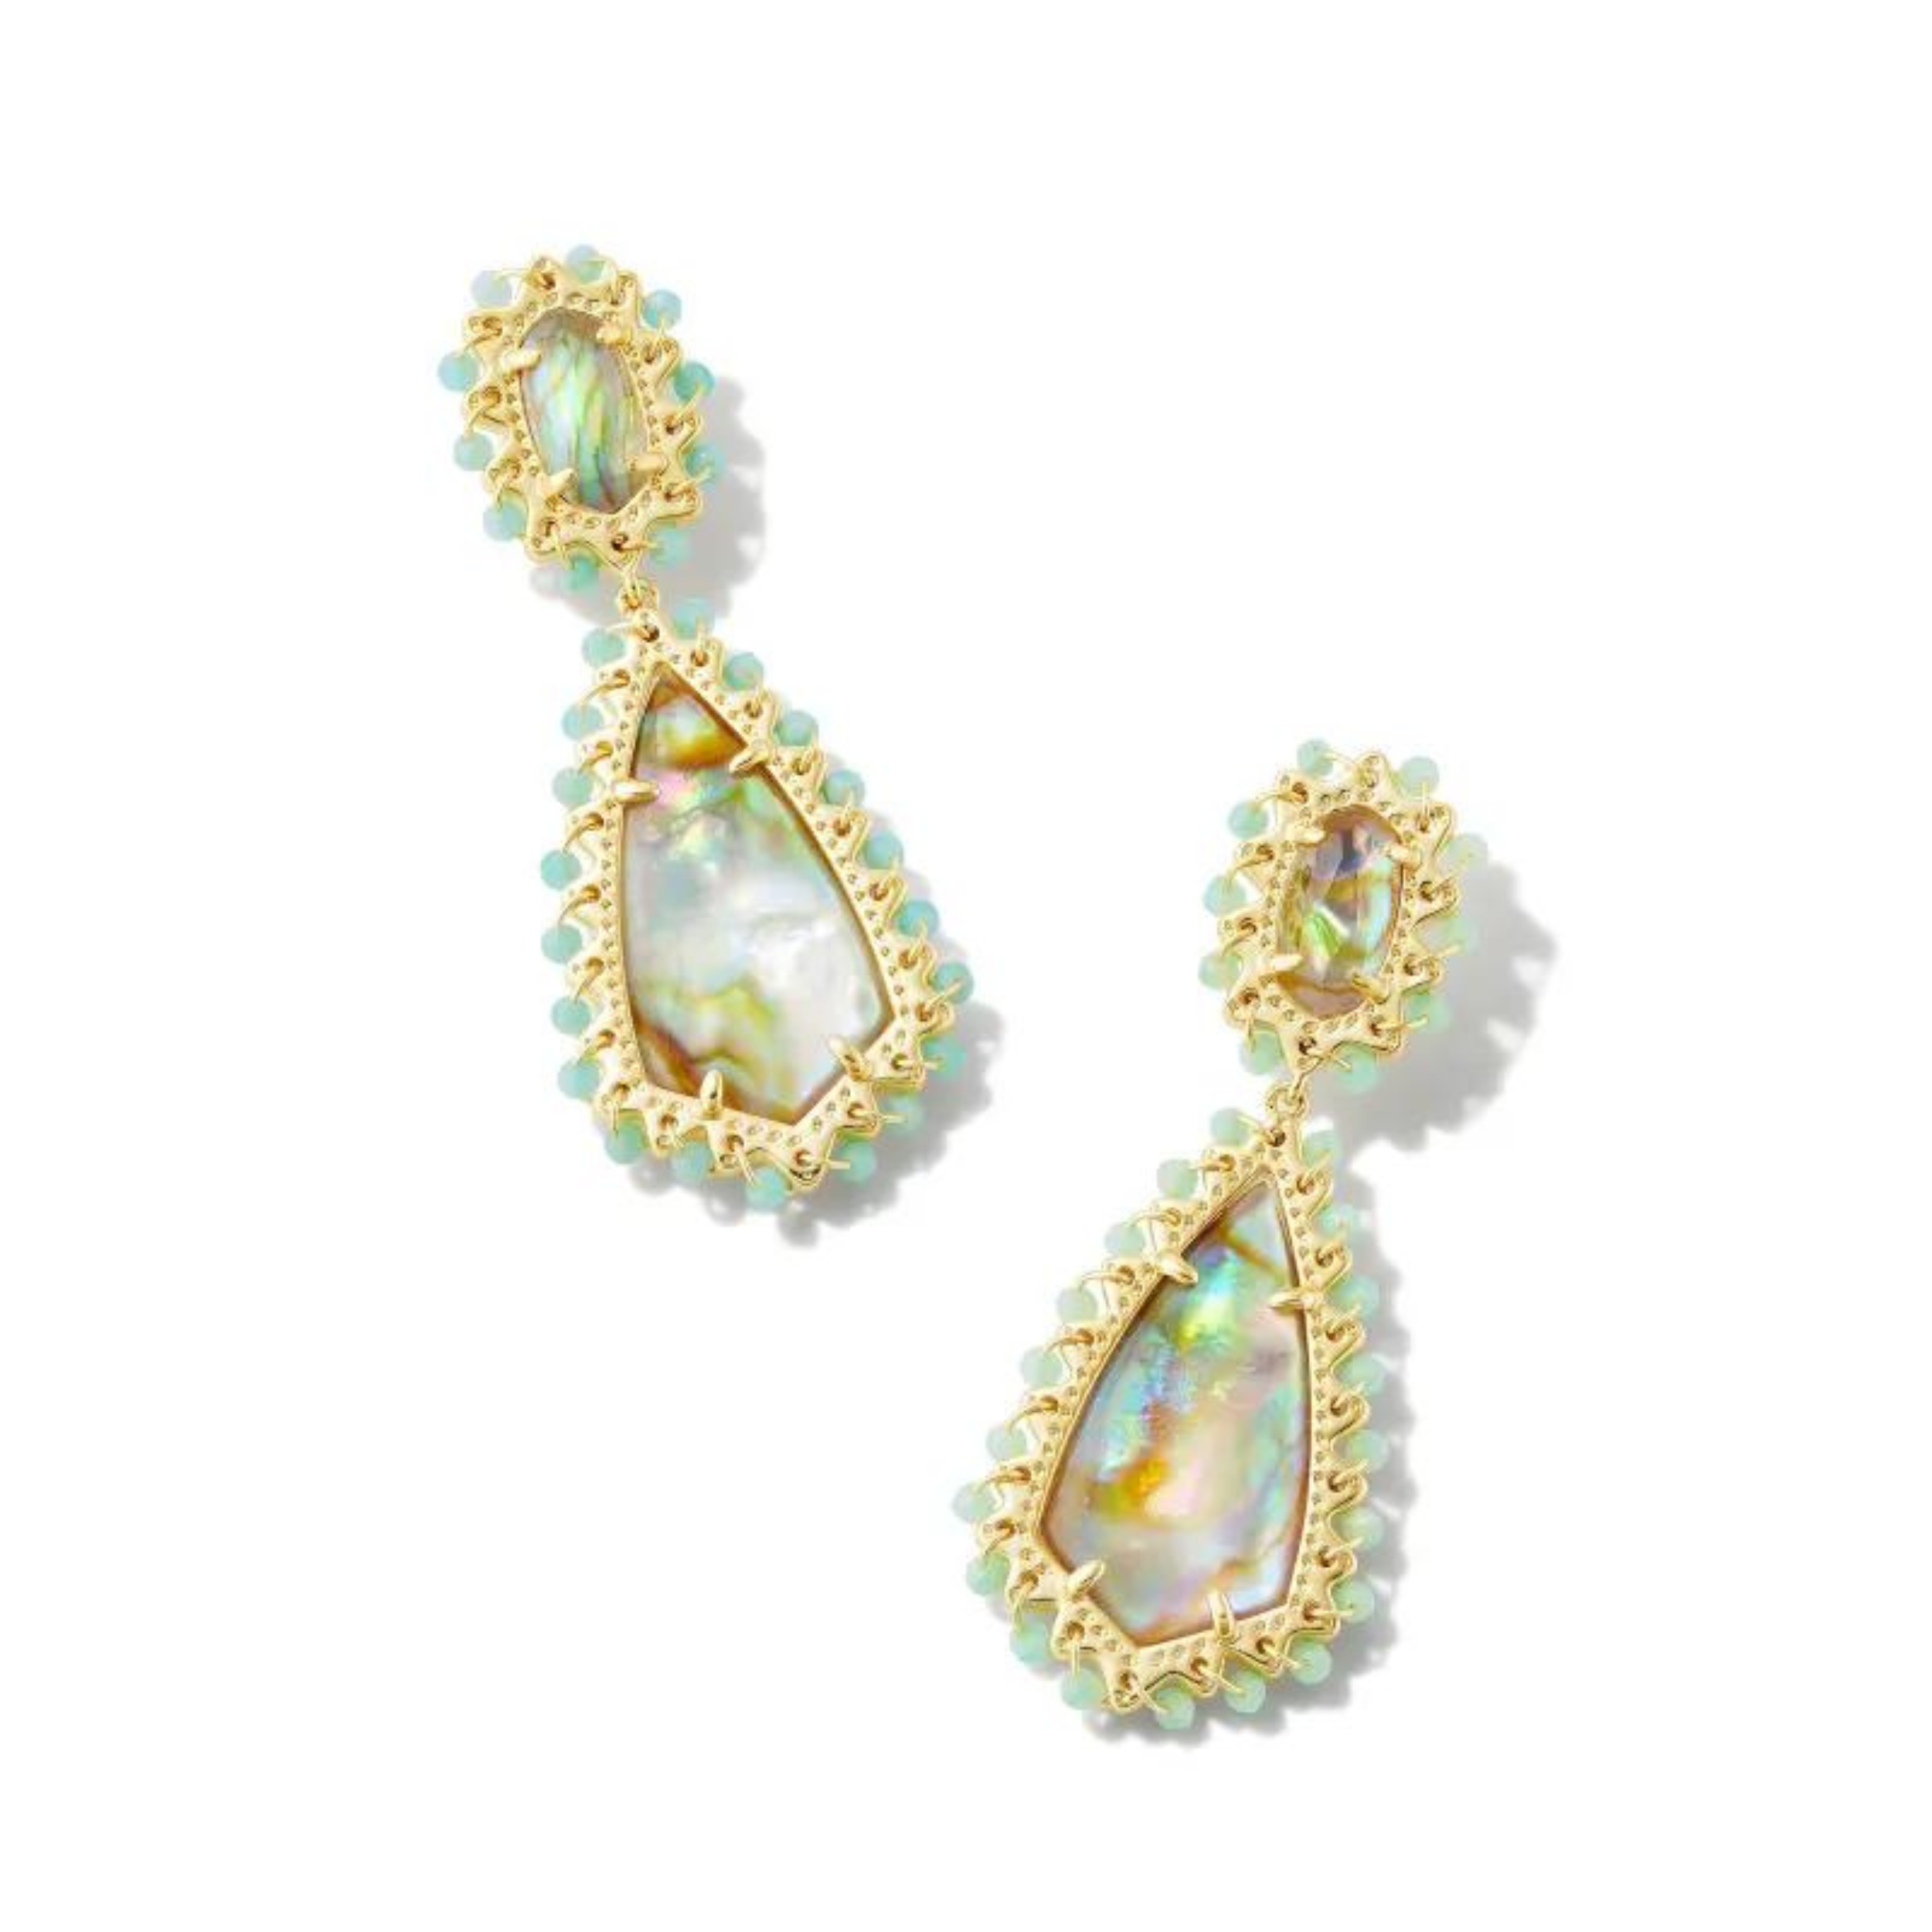 Gold post dangle earrings with iridescent mix stone with a mint crystal trim, pictured on a white background.